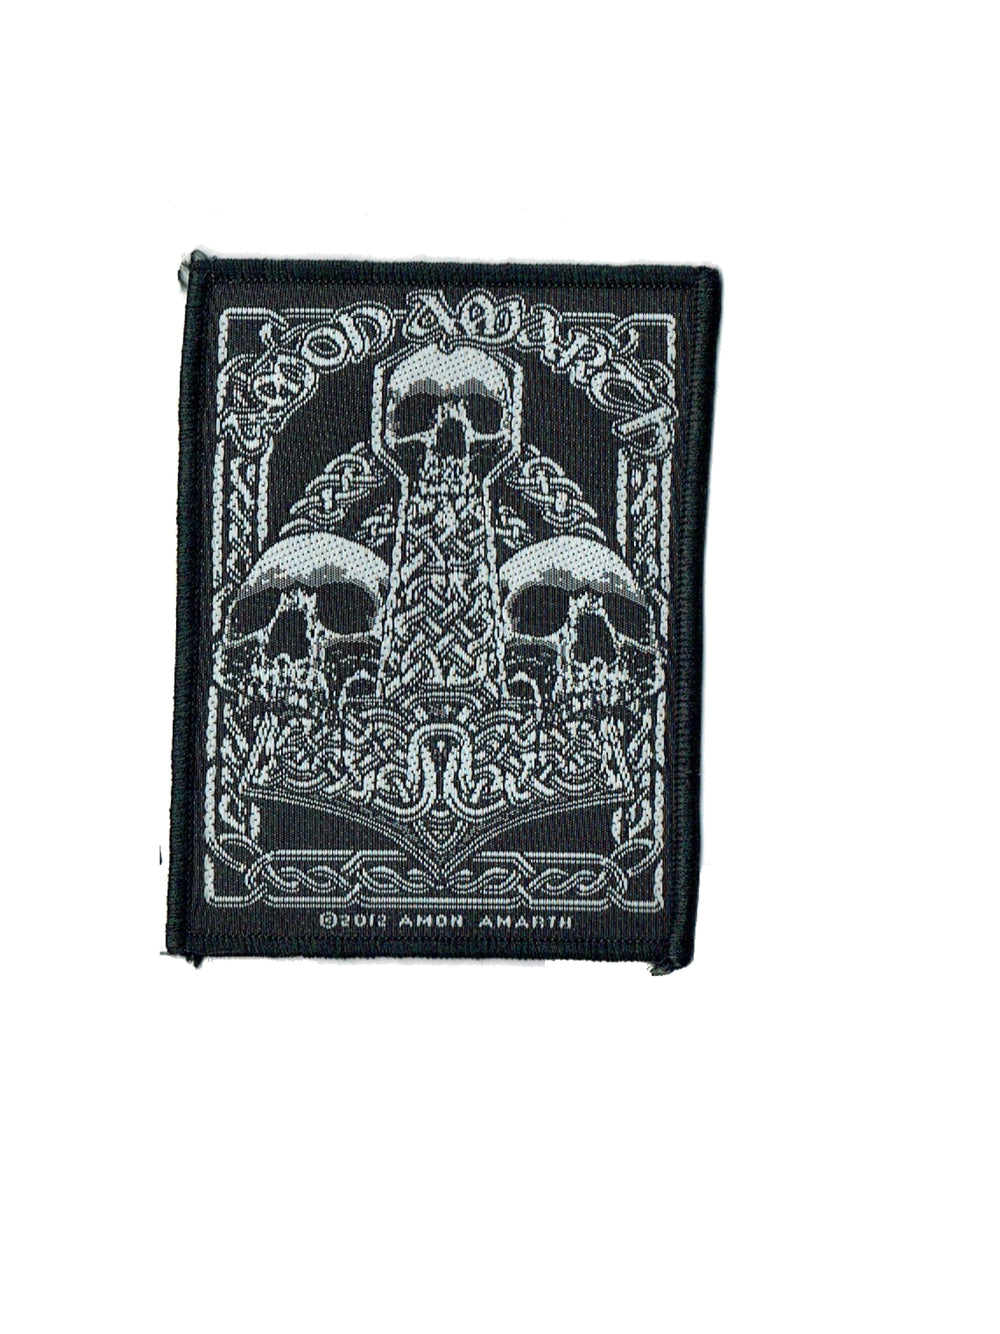 Amon Amarth Hammer Official Woven Patch Brand New